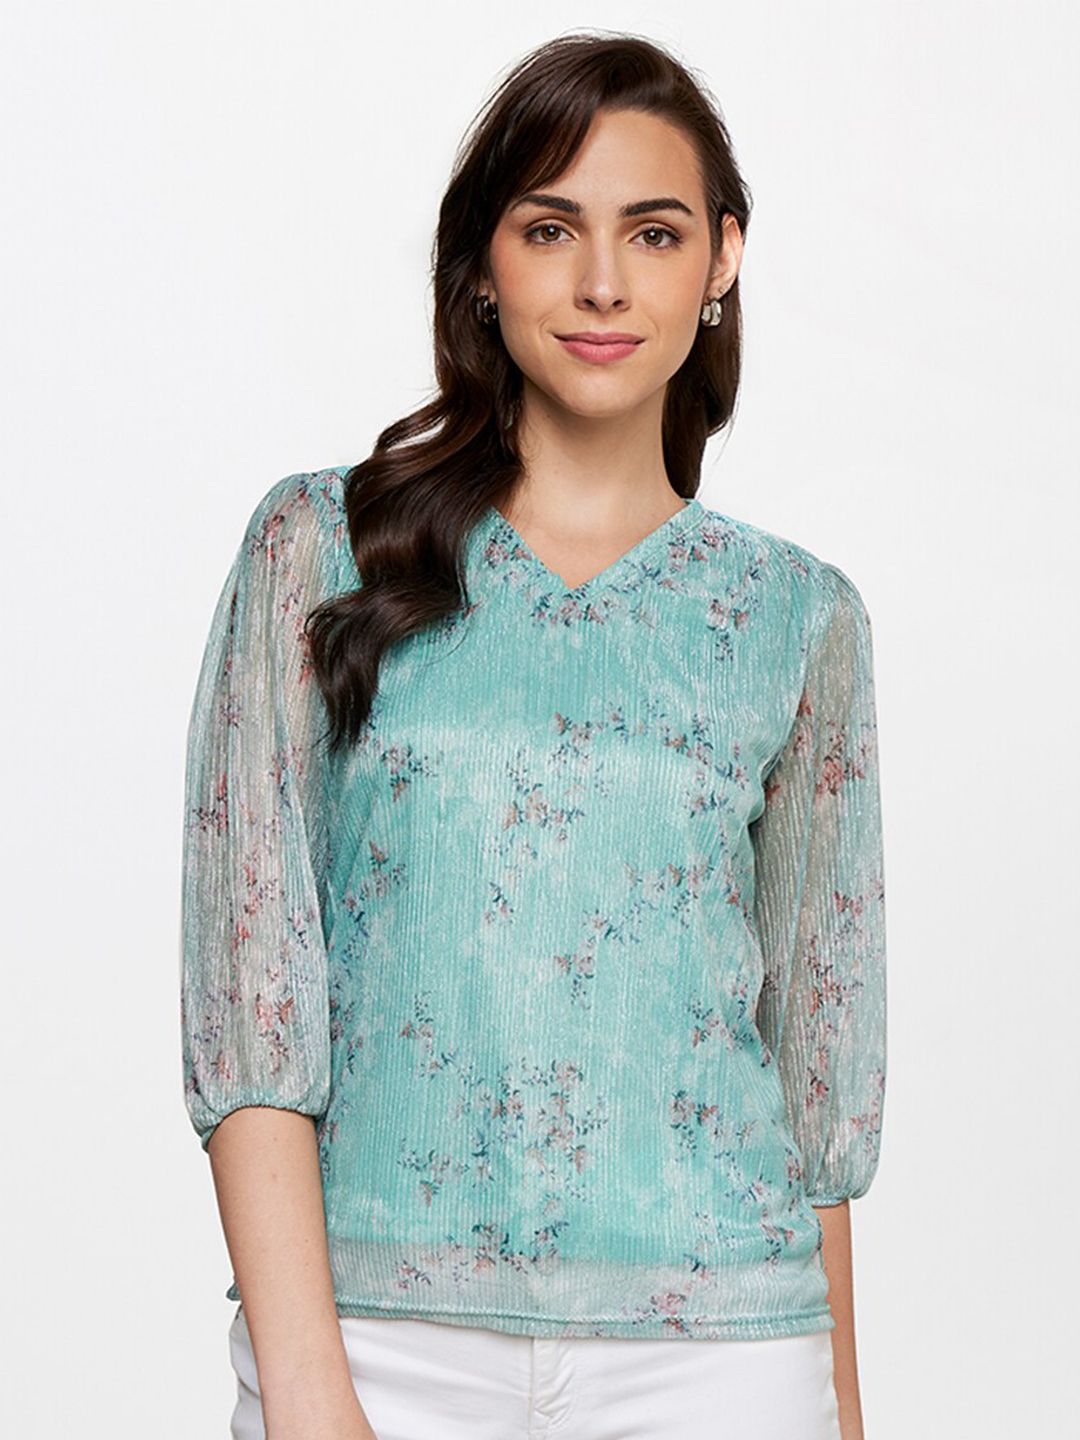 AND Blue & Red Floral Print Top Price in India